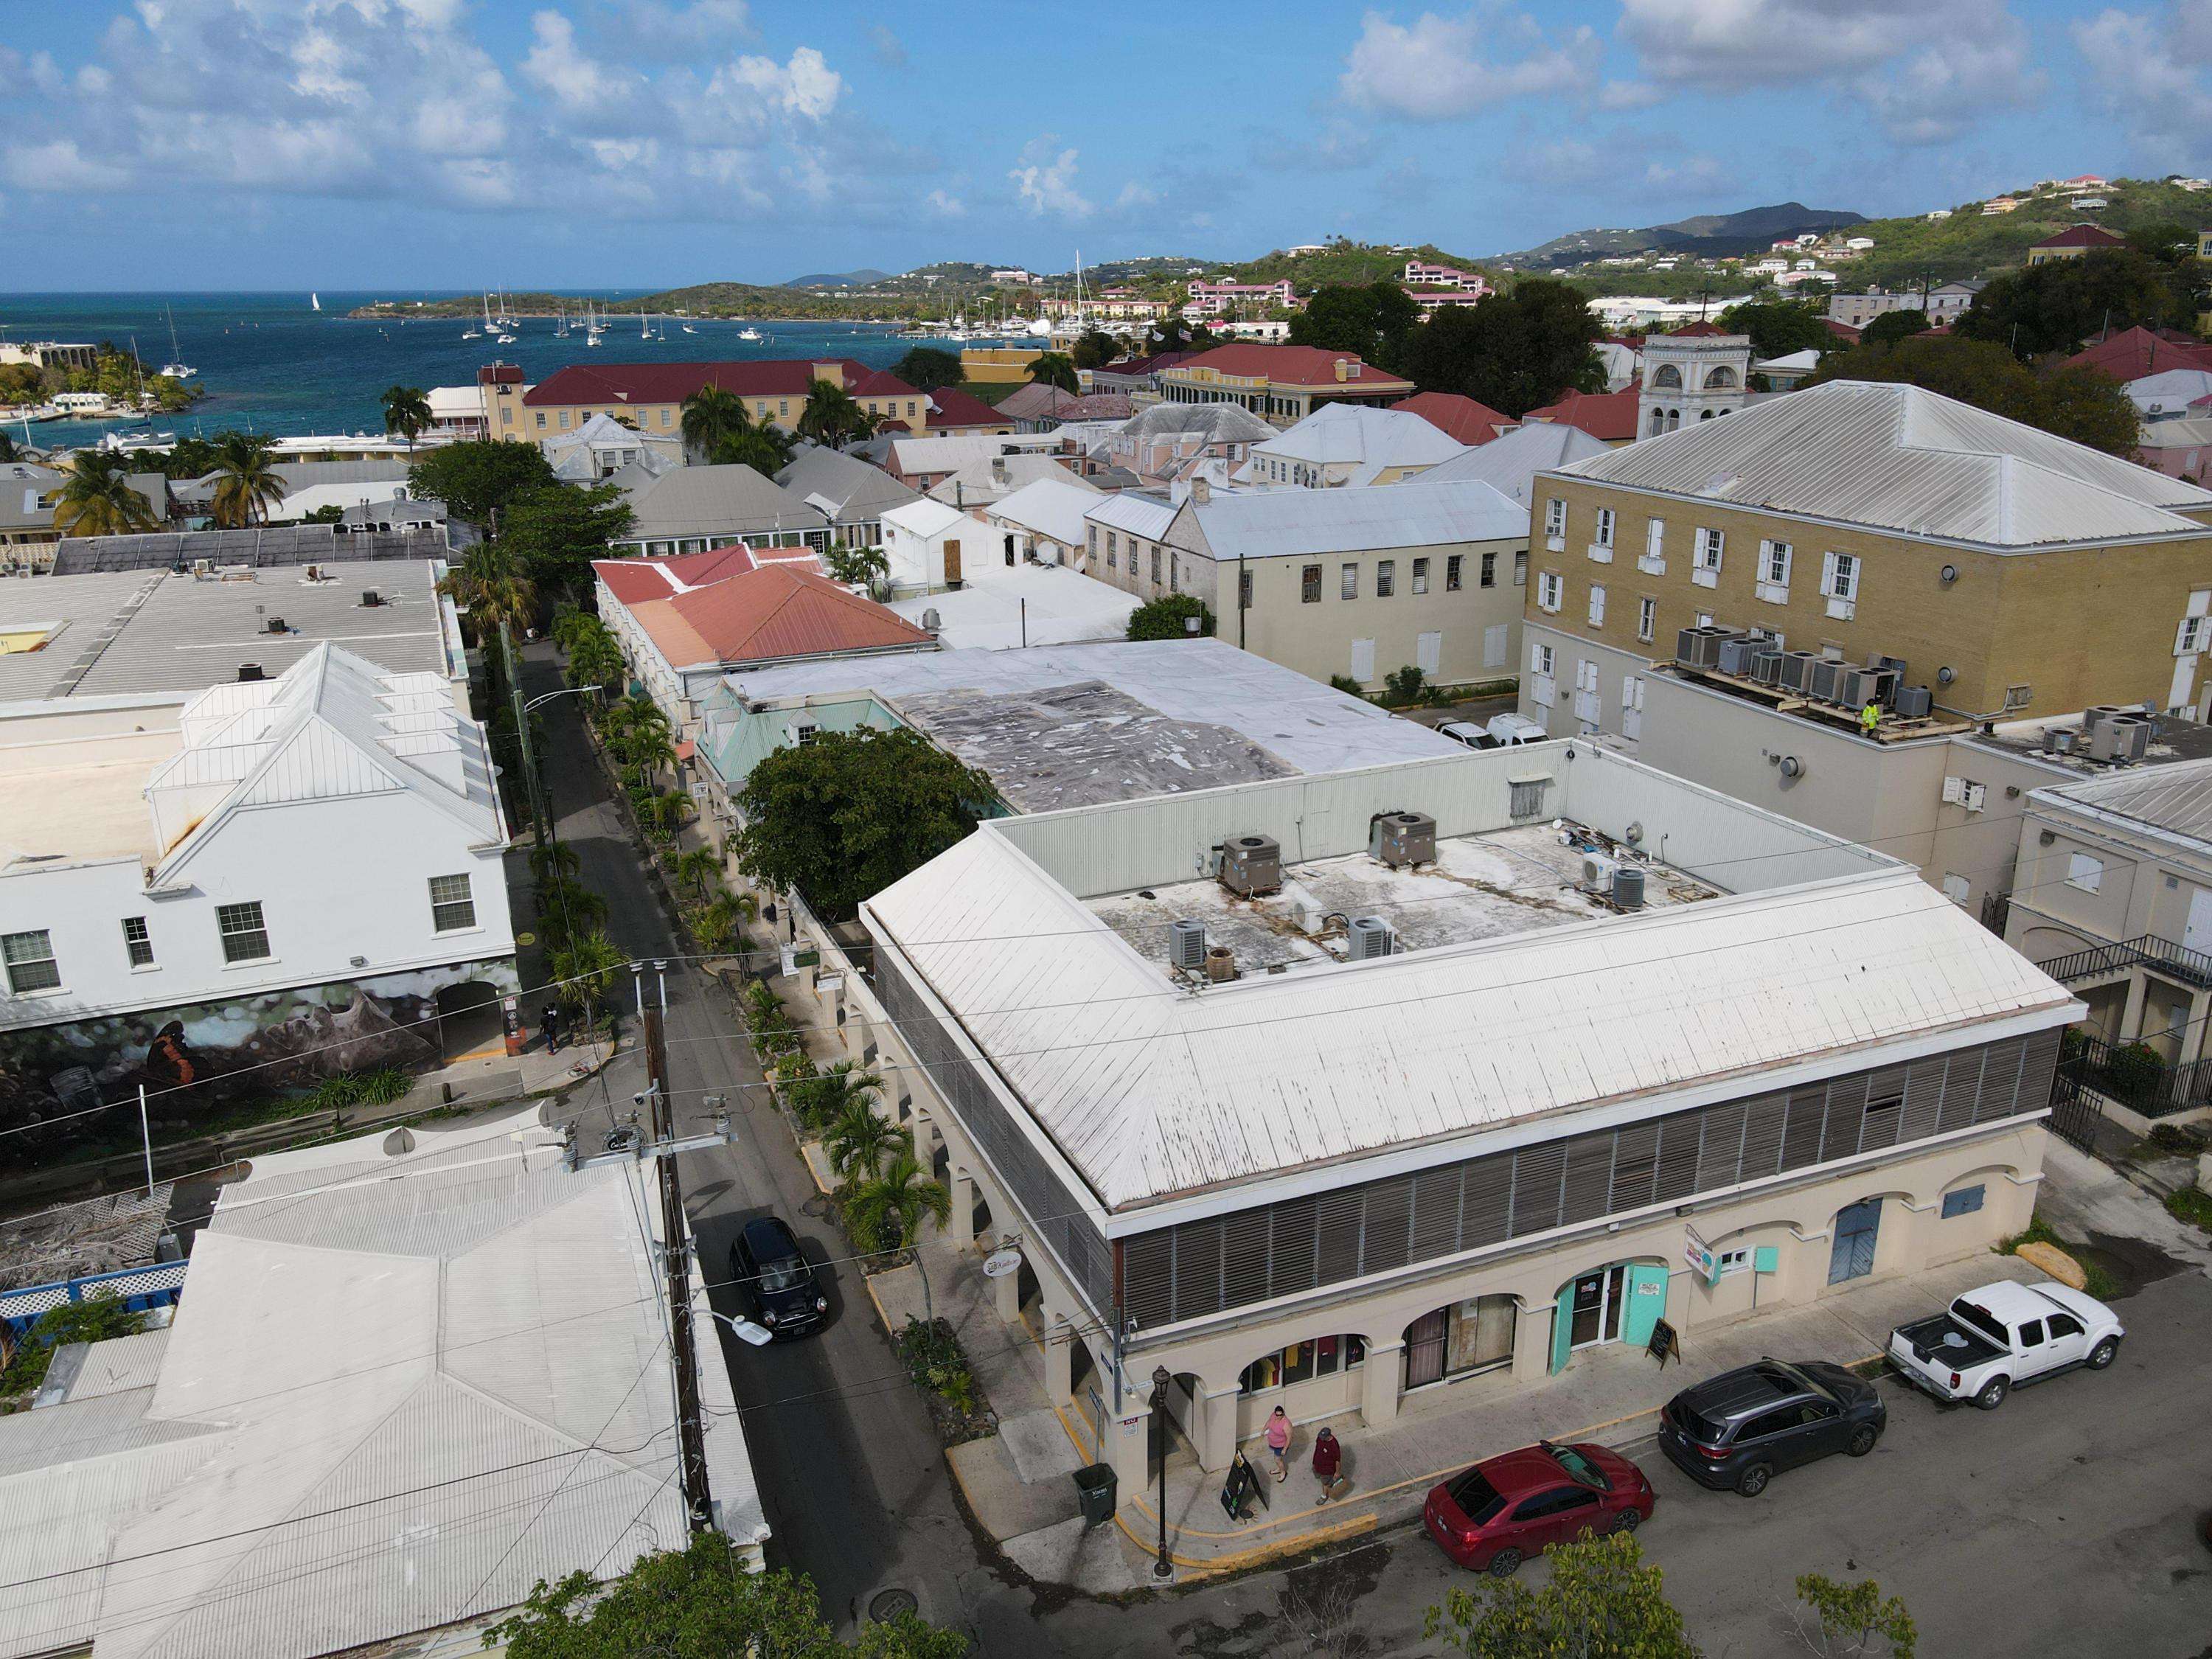 2,3,4-A, 4 Strand Street CH, 21-796, Other, Commercial/Industrial,  for sale, Dionne Nelthropp, Hibiscus Homes